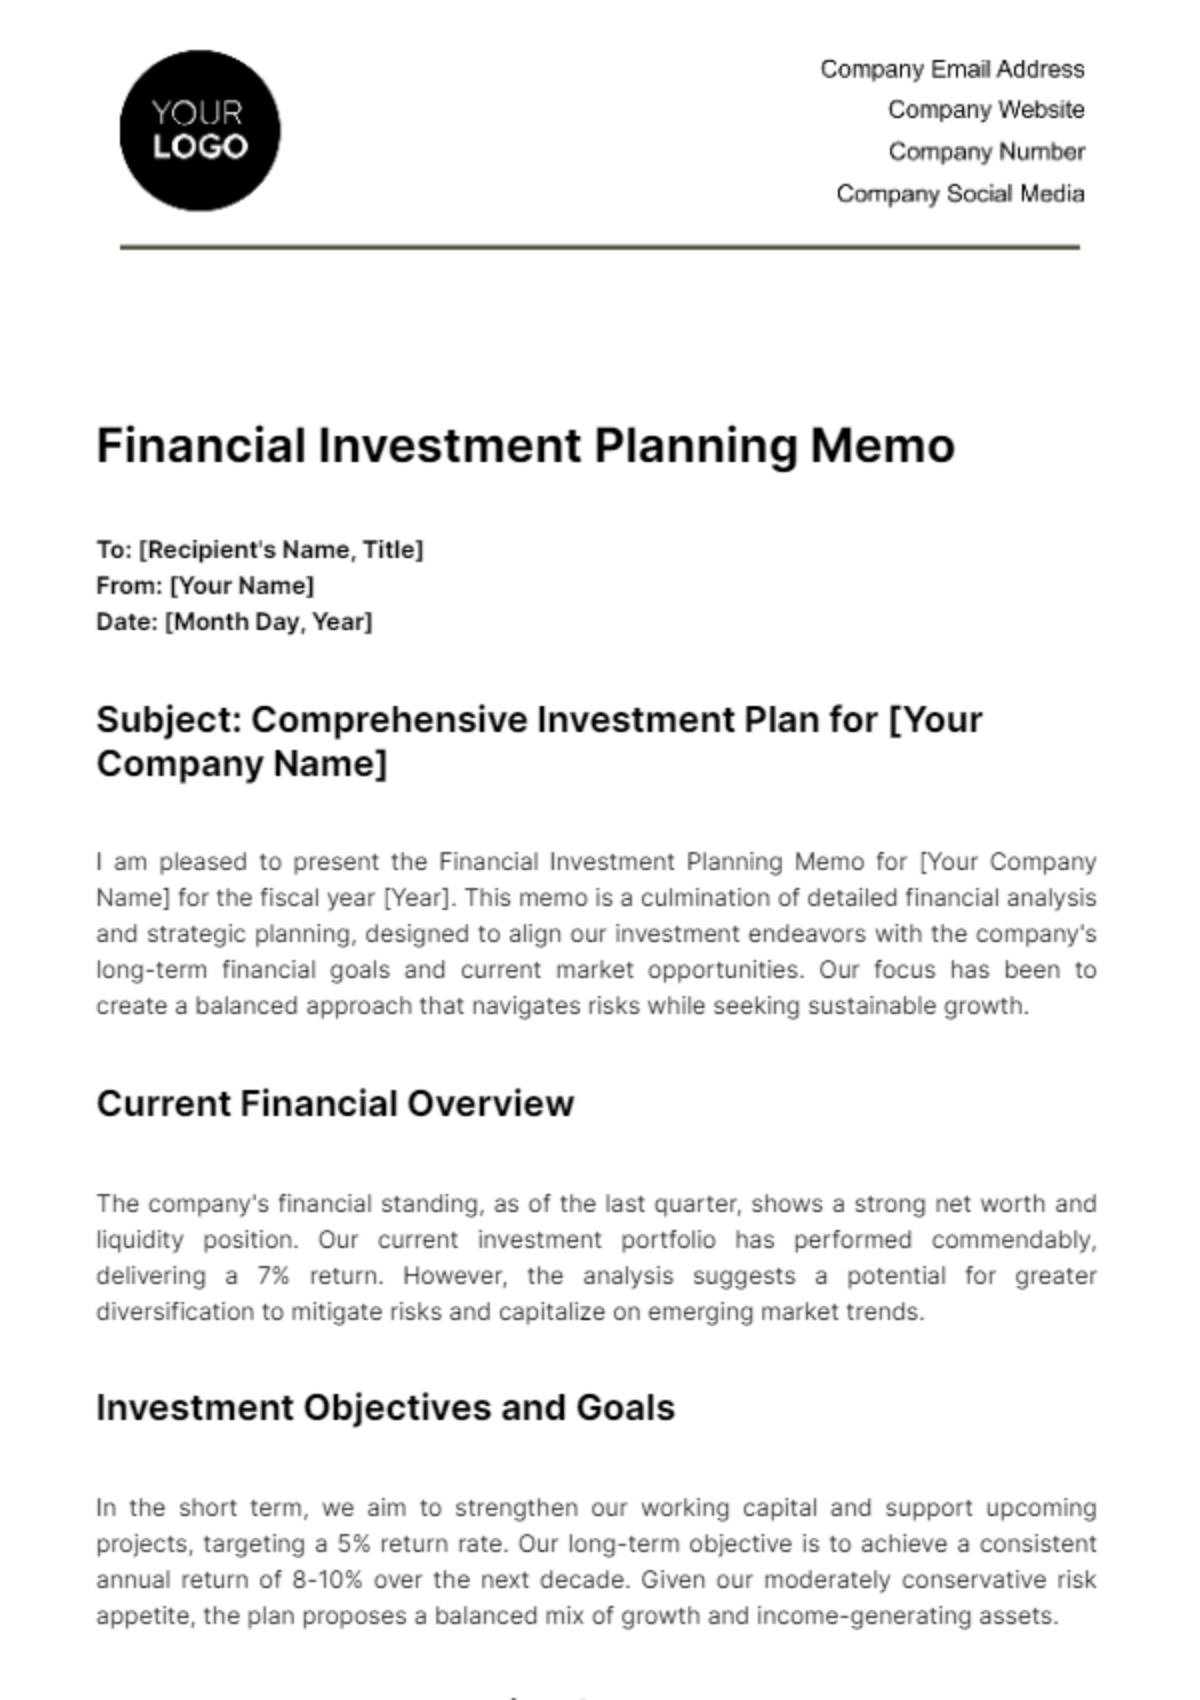 Financial Investment Planning Memo Template